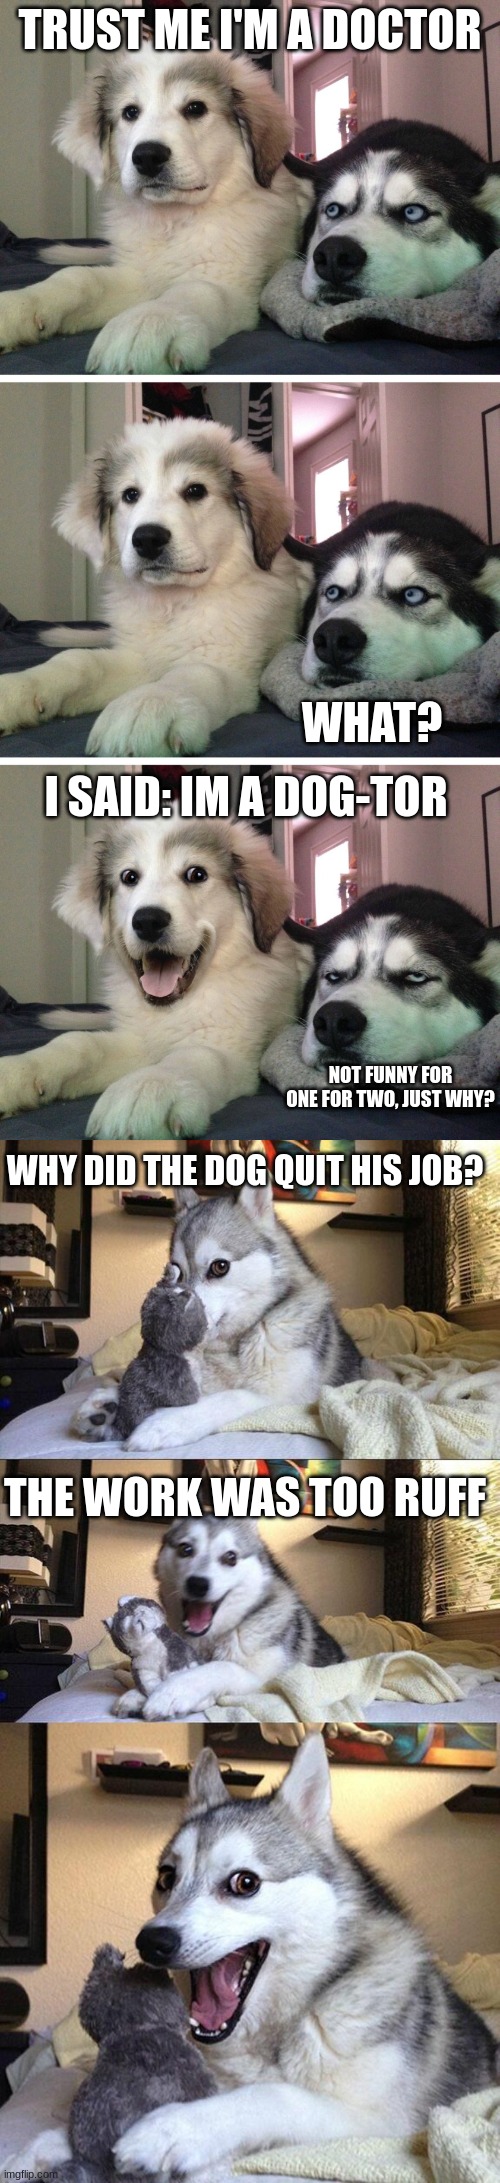 2 dog jokes | TRUST ME I'M A DOCTOR; WHAT? I SAID: IM A DOG-TOR; NOT FUNNY FOR ONE FOR TWO, JUST WHY? WHY DID THE DOG QUIT HIS JOB? THE WORK WAS TOO RUFF | image tagged in memes,not funny | made w/ Imgflip meme maker